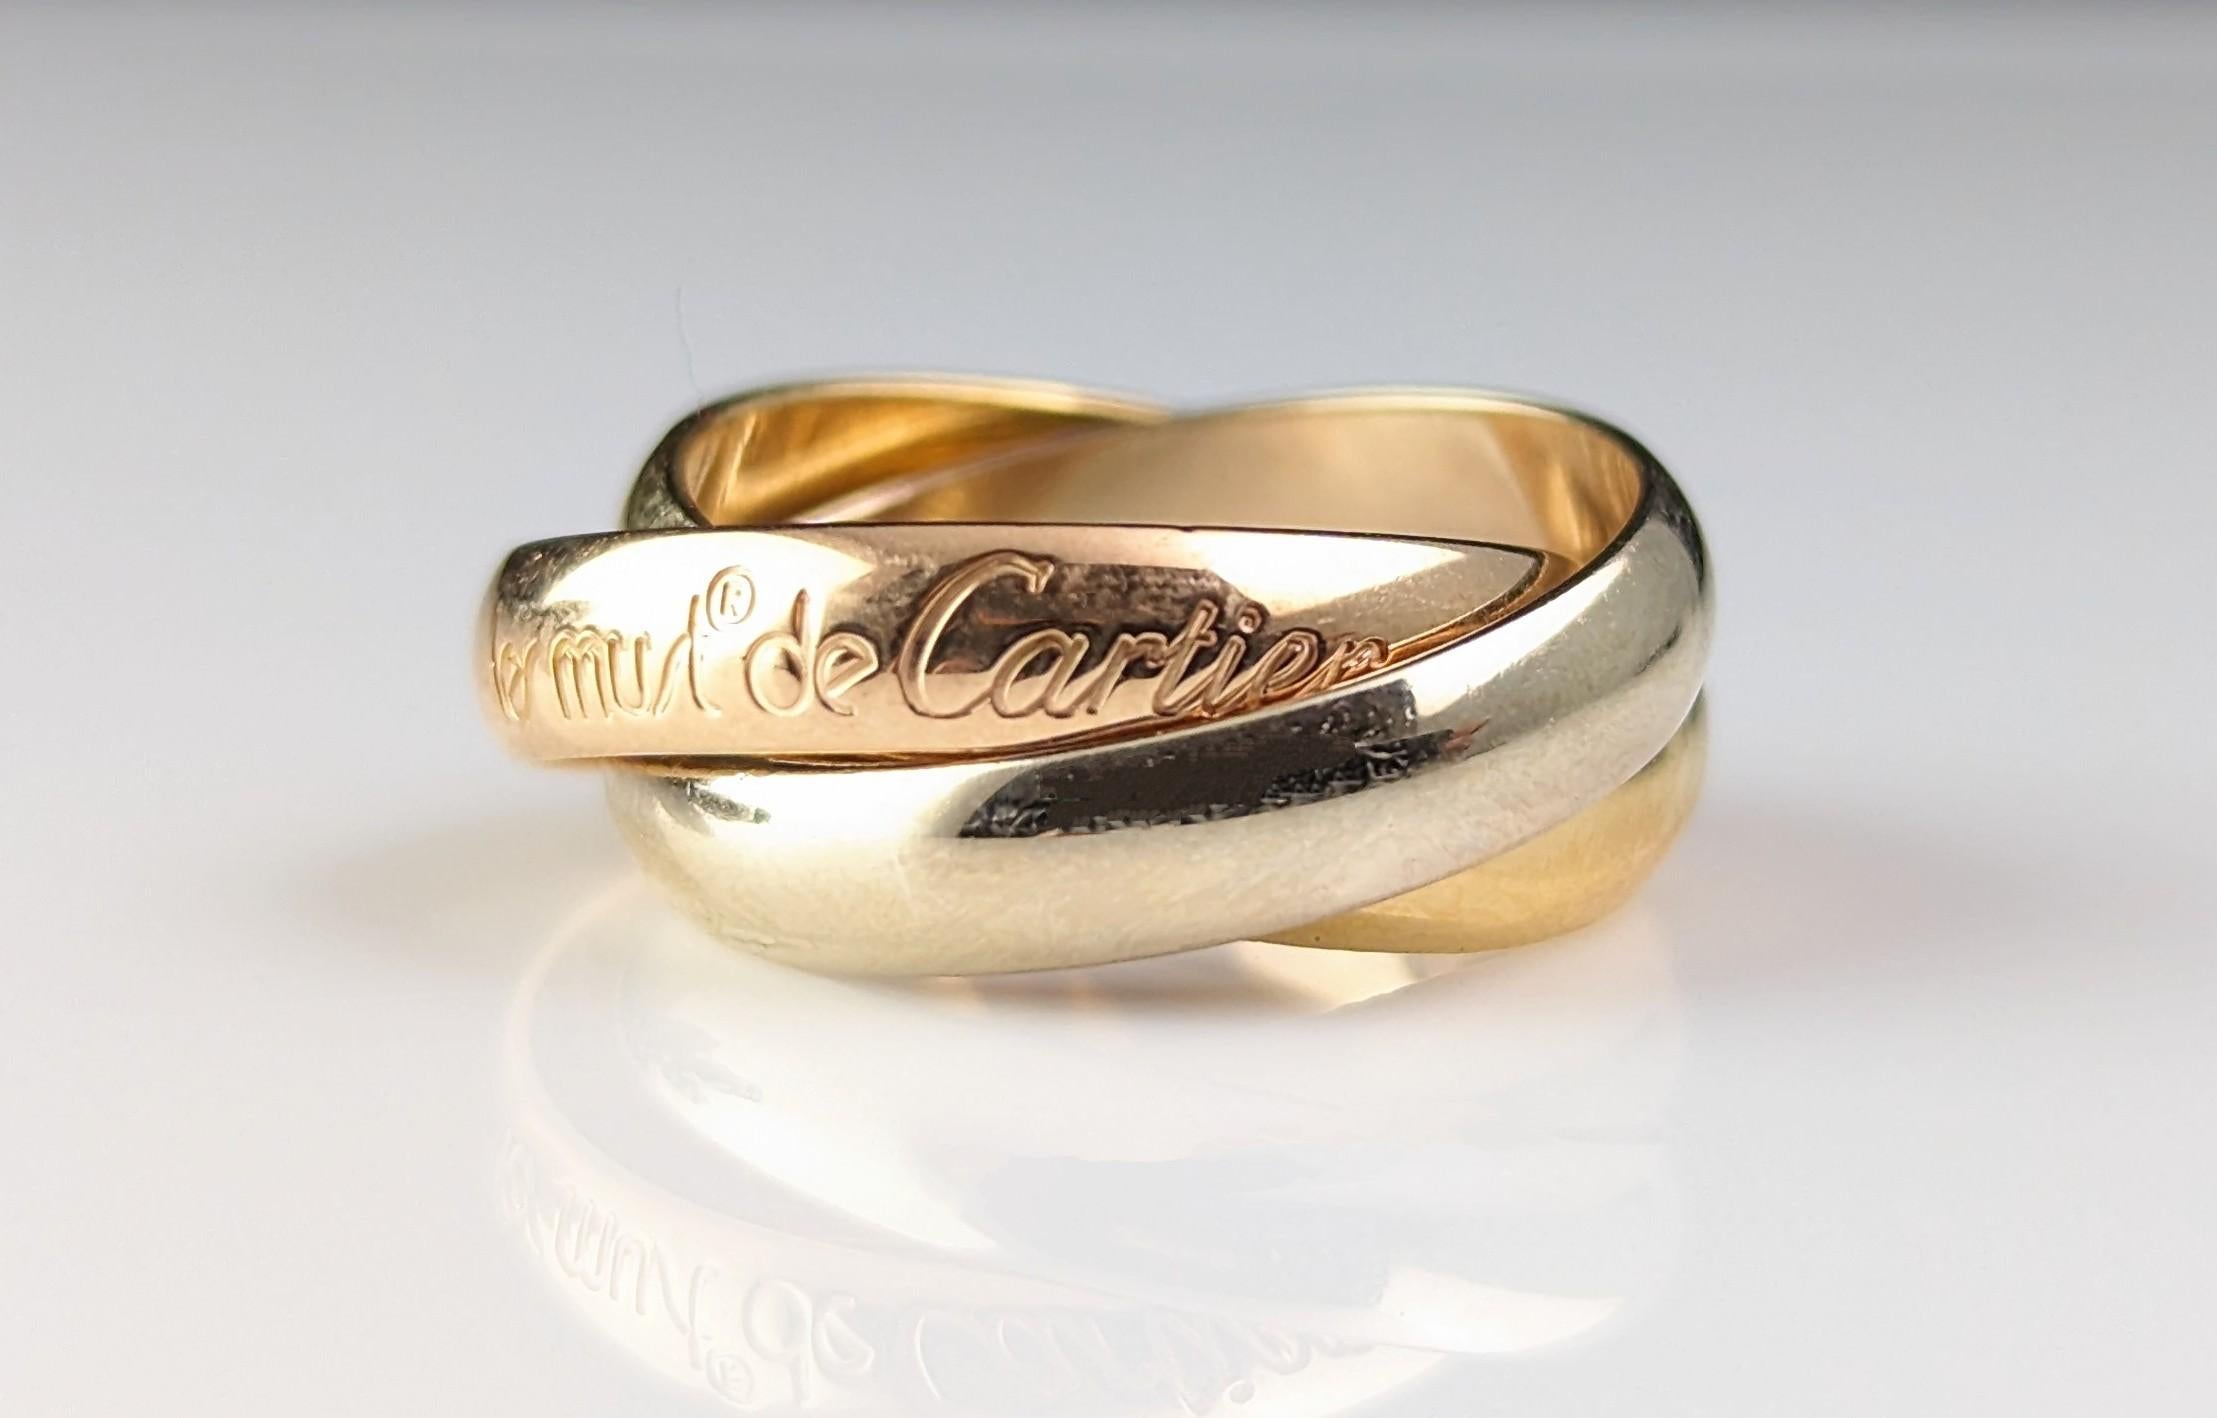 Vintage Les Must de Cartier Trinity Ring, 18k Gold, Boxed  im Angebot 1